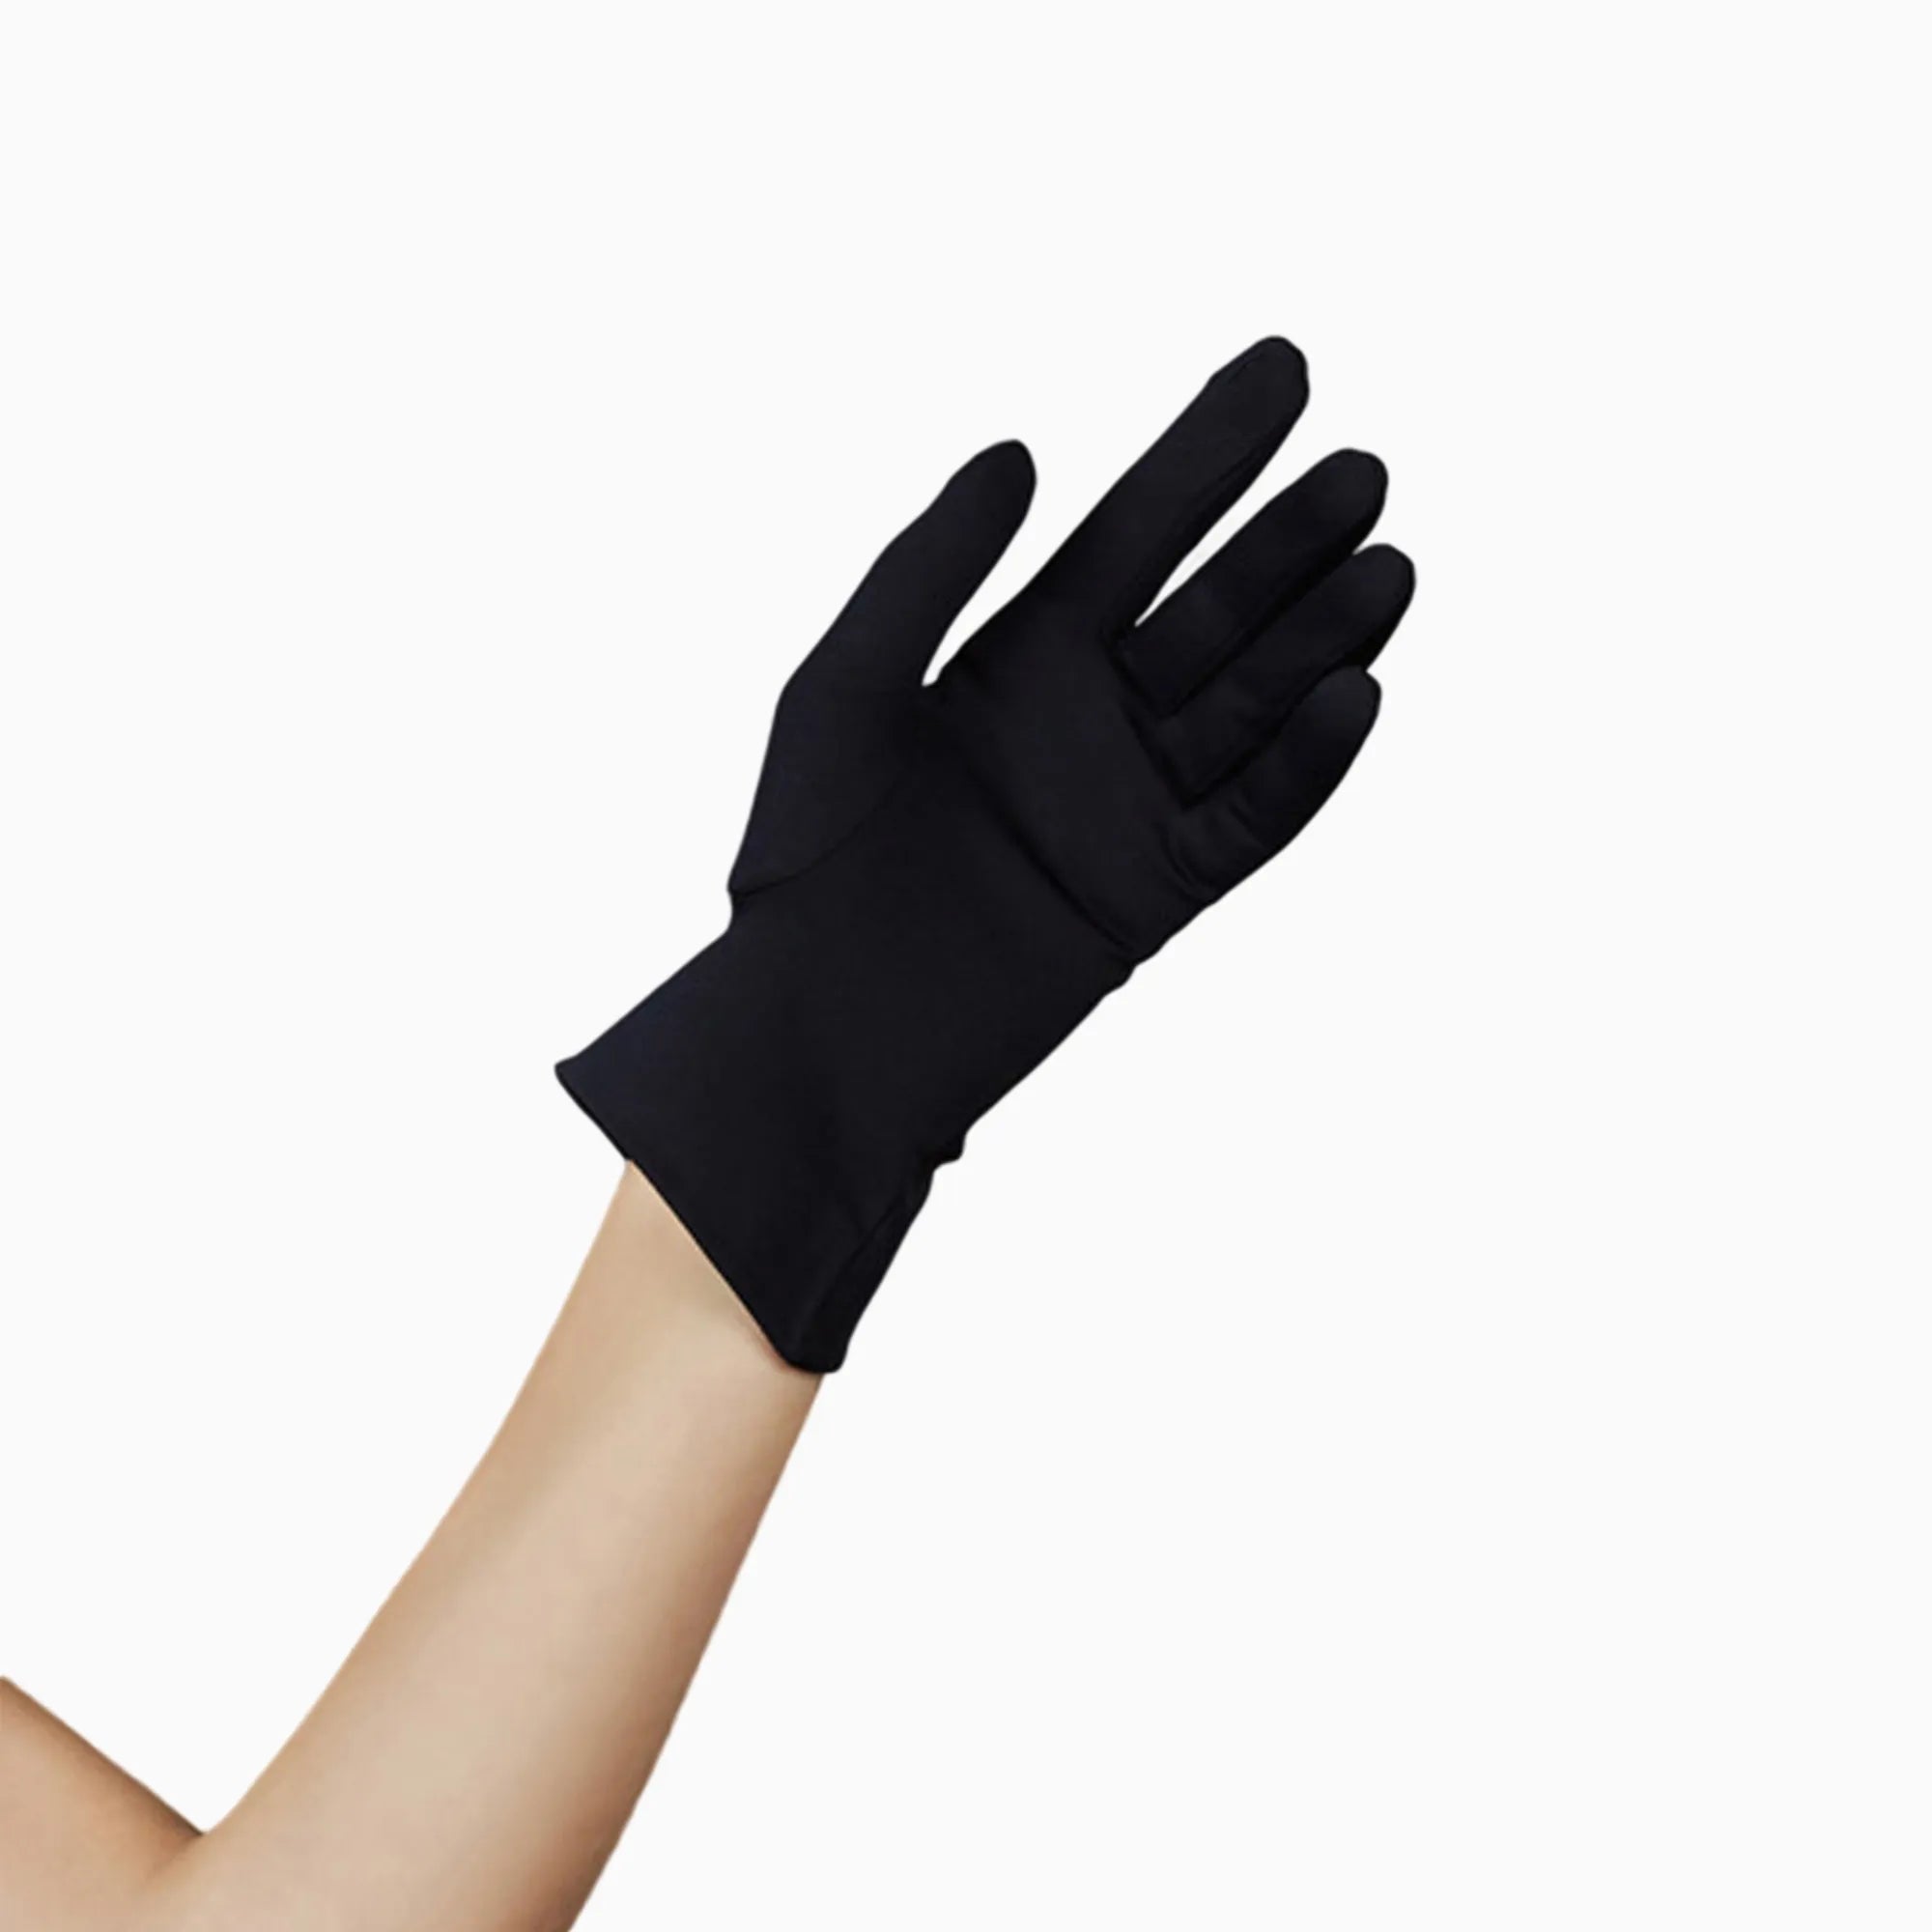 Open palm of THE ISABELLE wrist day glove in black.